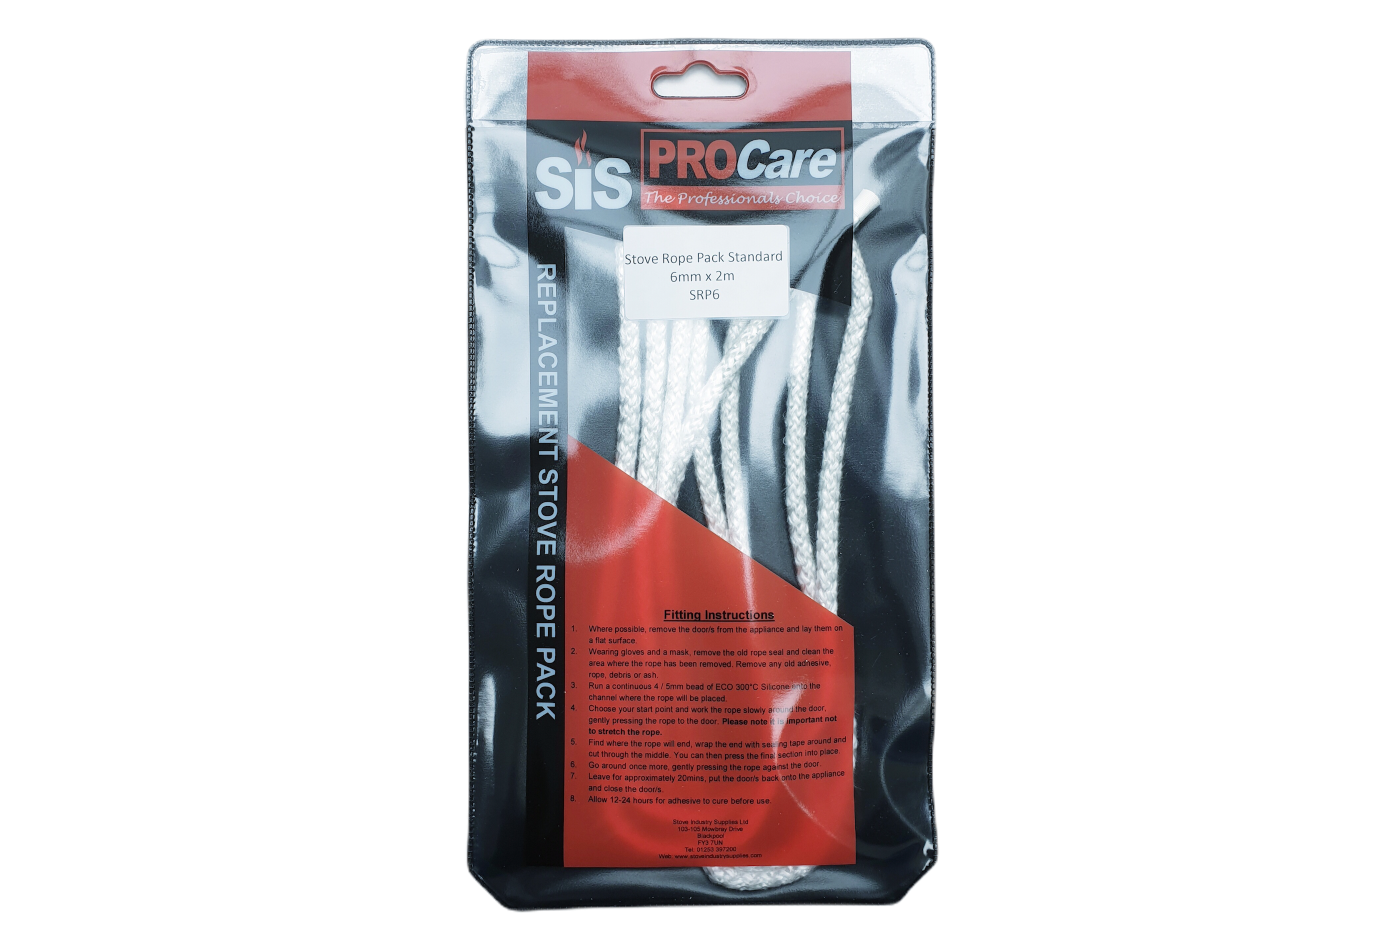 SiS Procare White 6 milimetre x 2 metre Standard Stove Rope Pack - product code SRP6